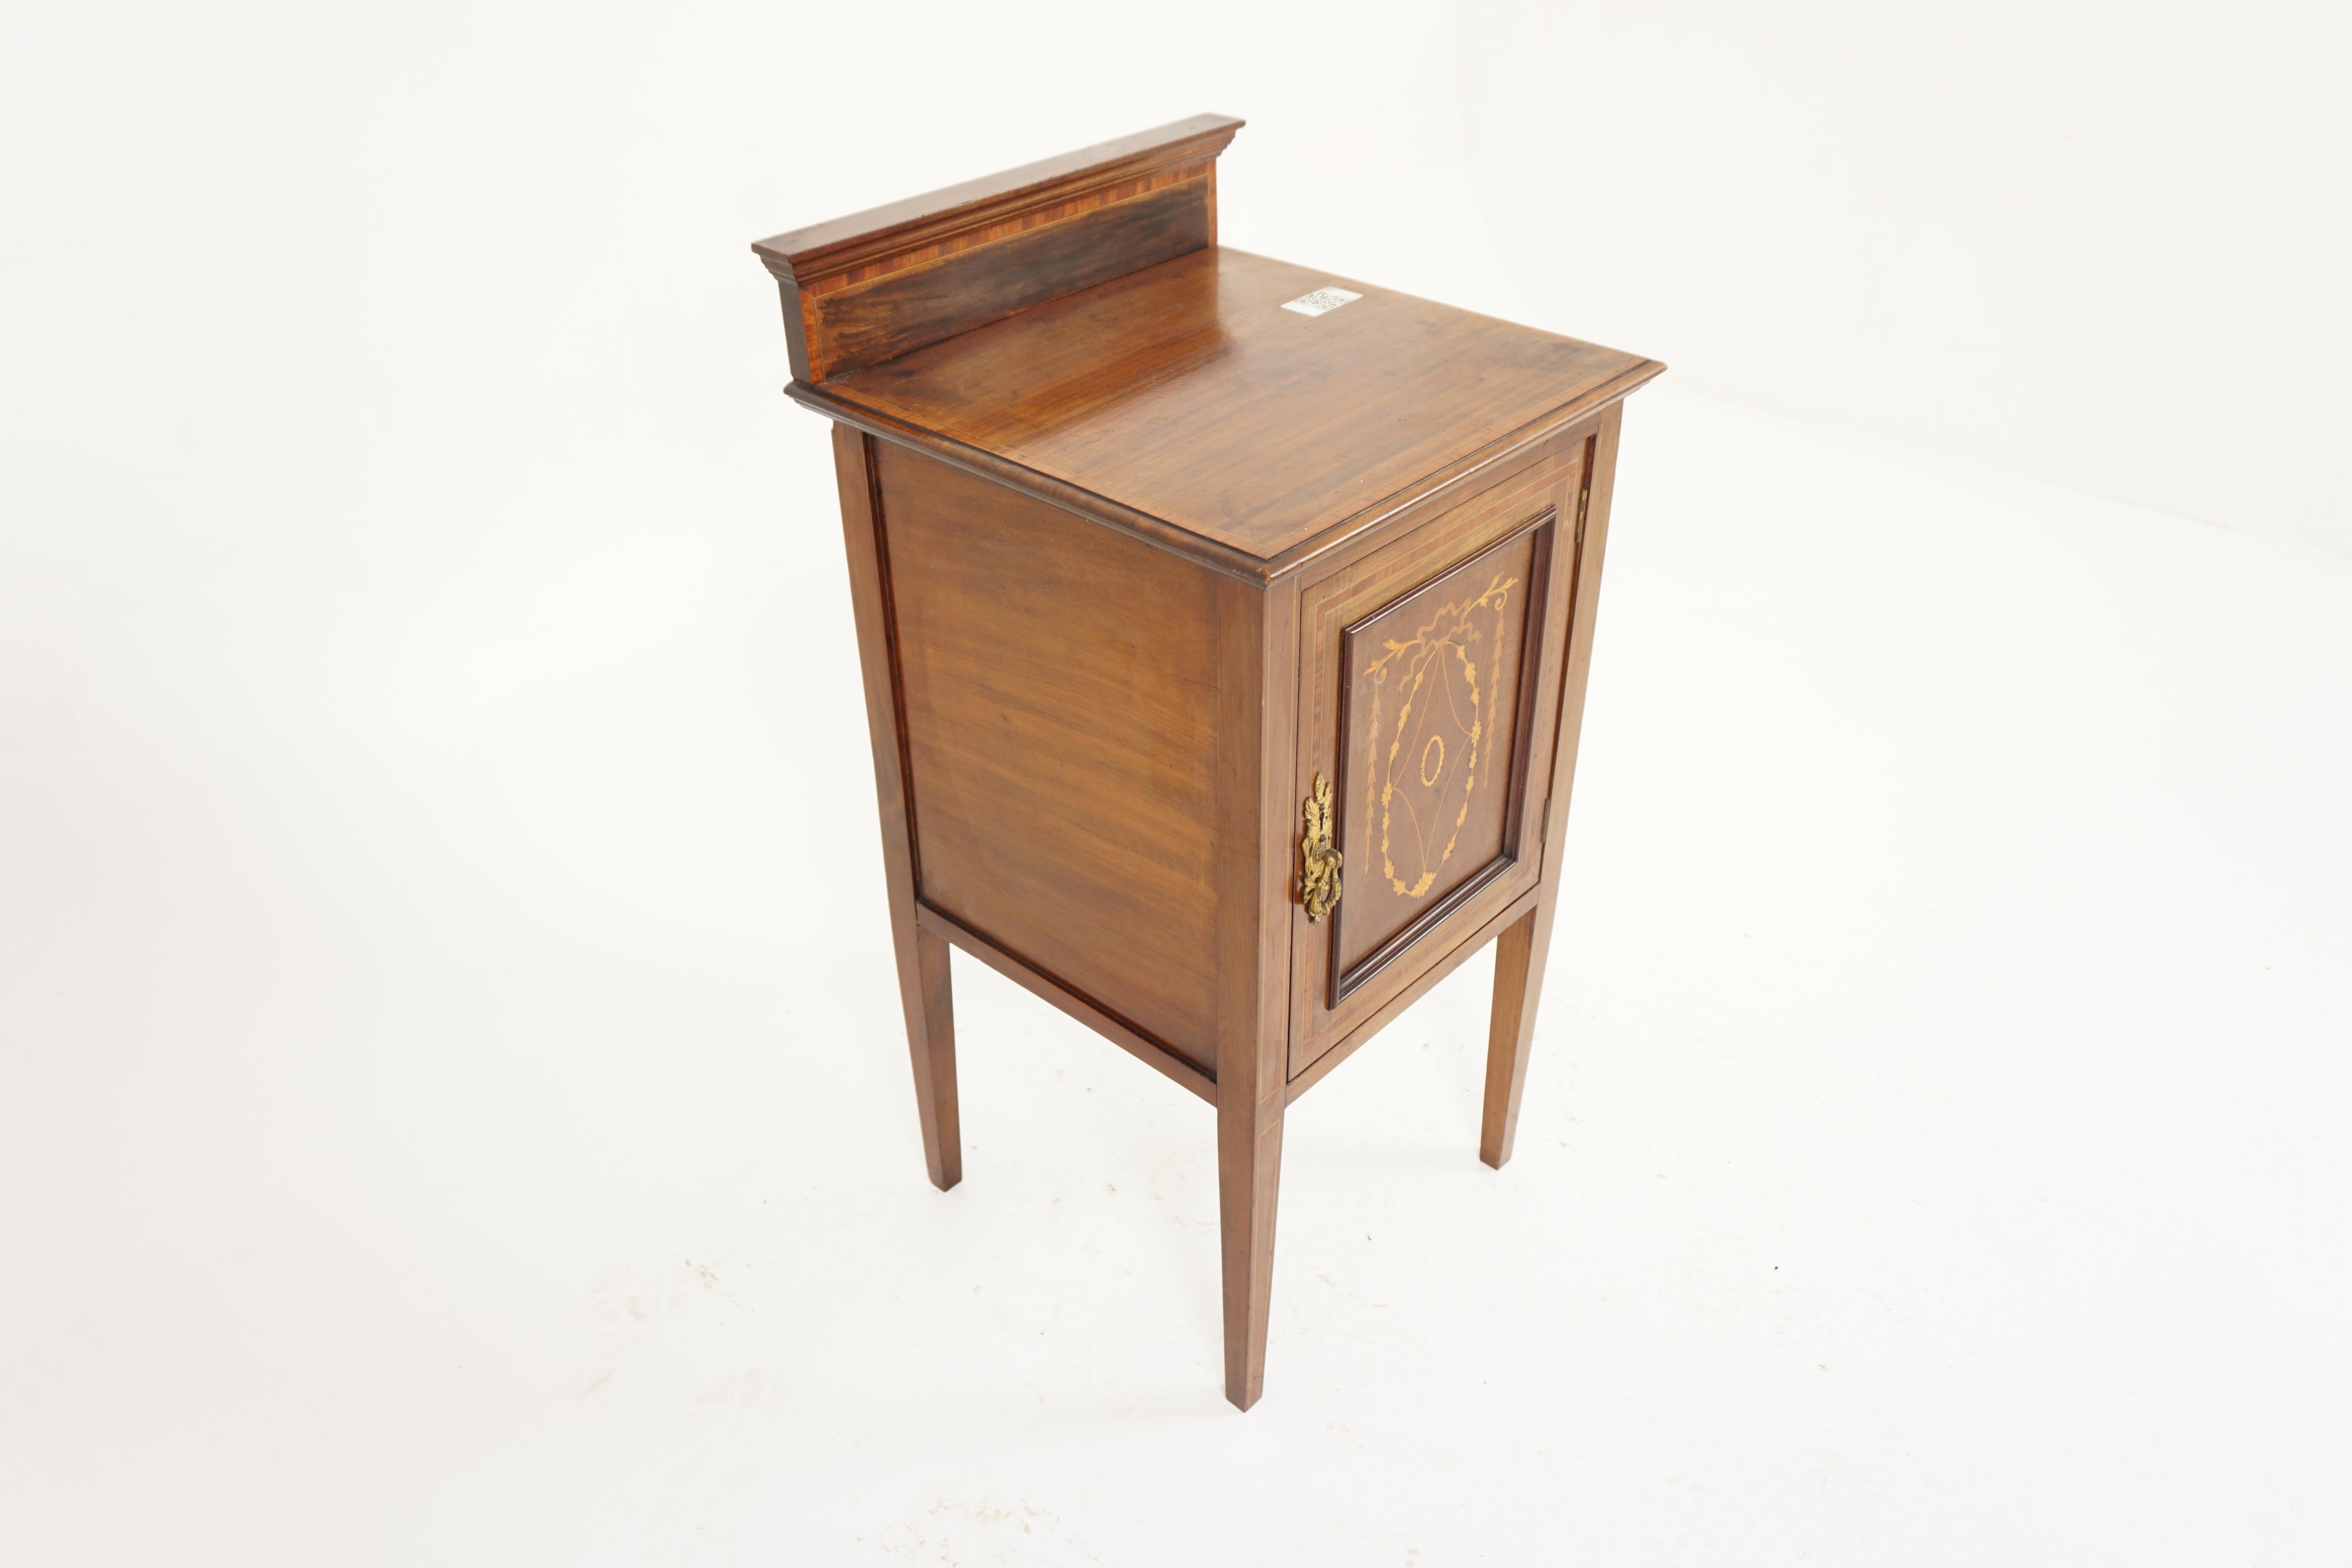 Scottish Antique Inlaid Walnut Nightstand, Sheraton Bedside Table, Scotland 1900, H969 For Sale